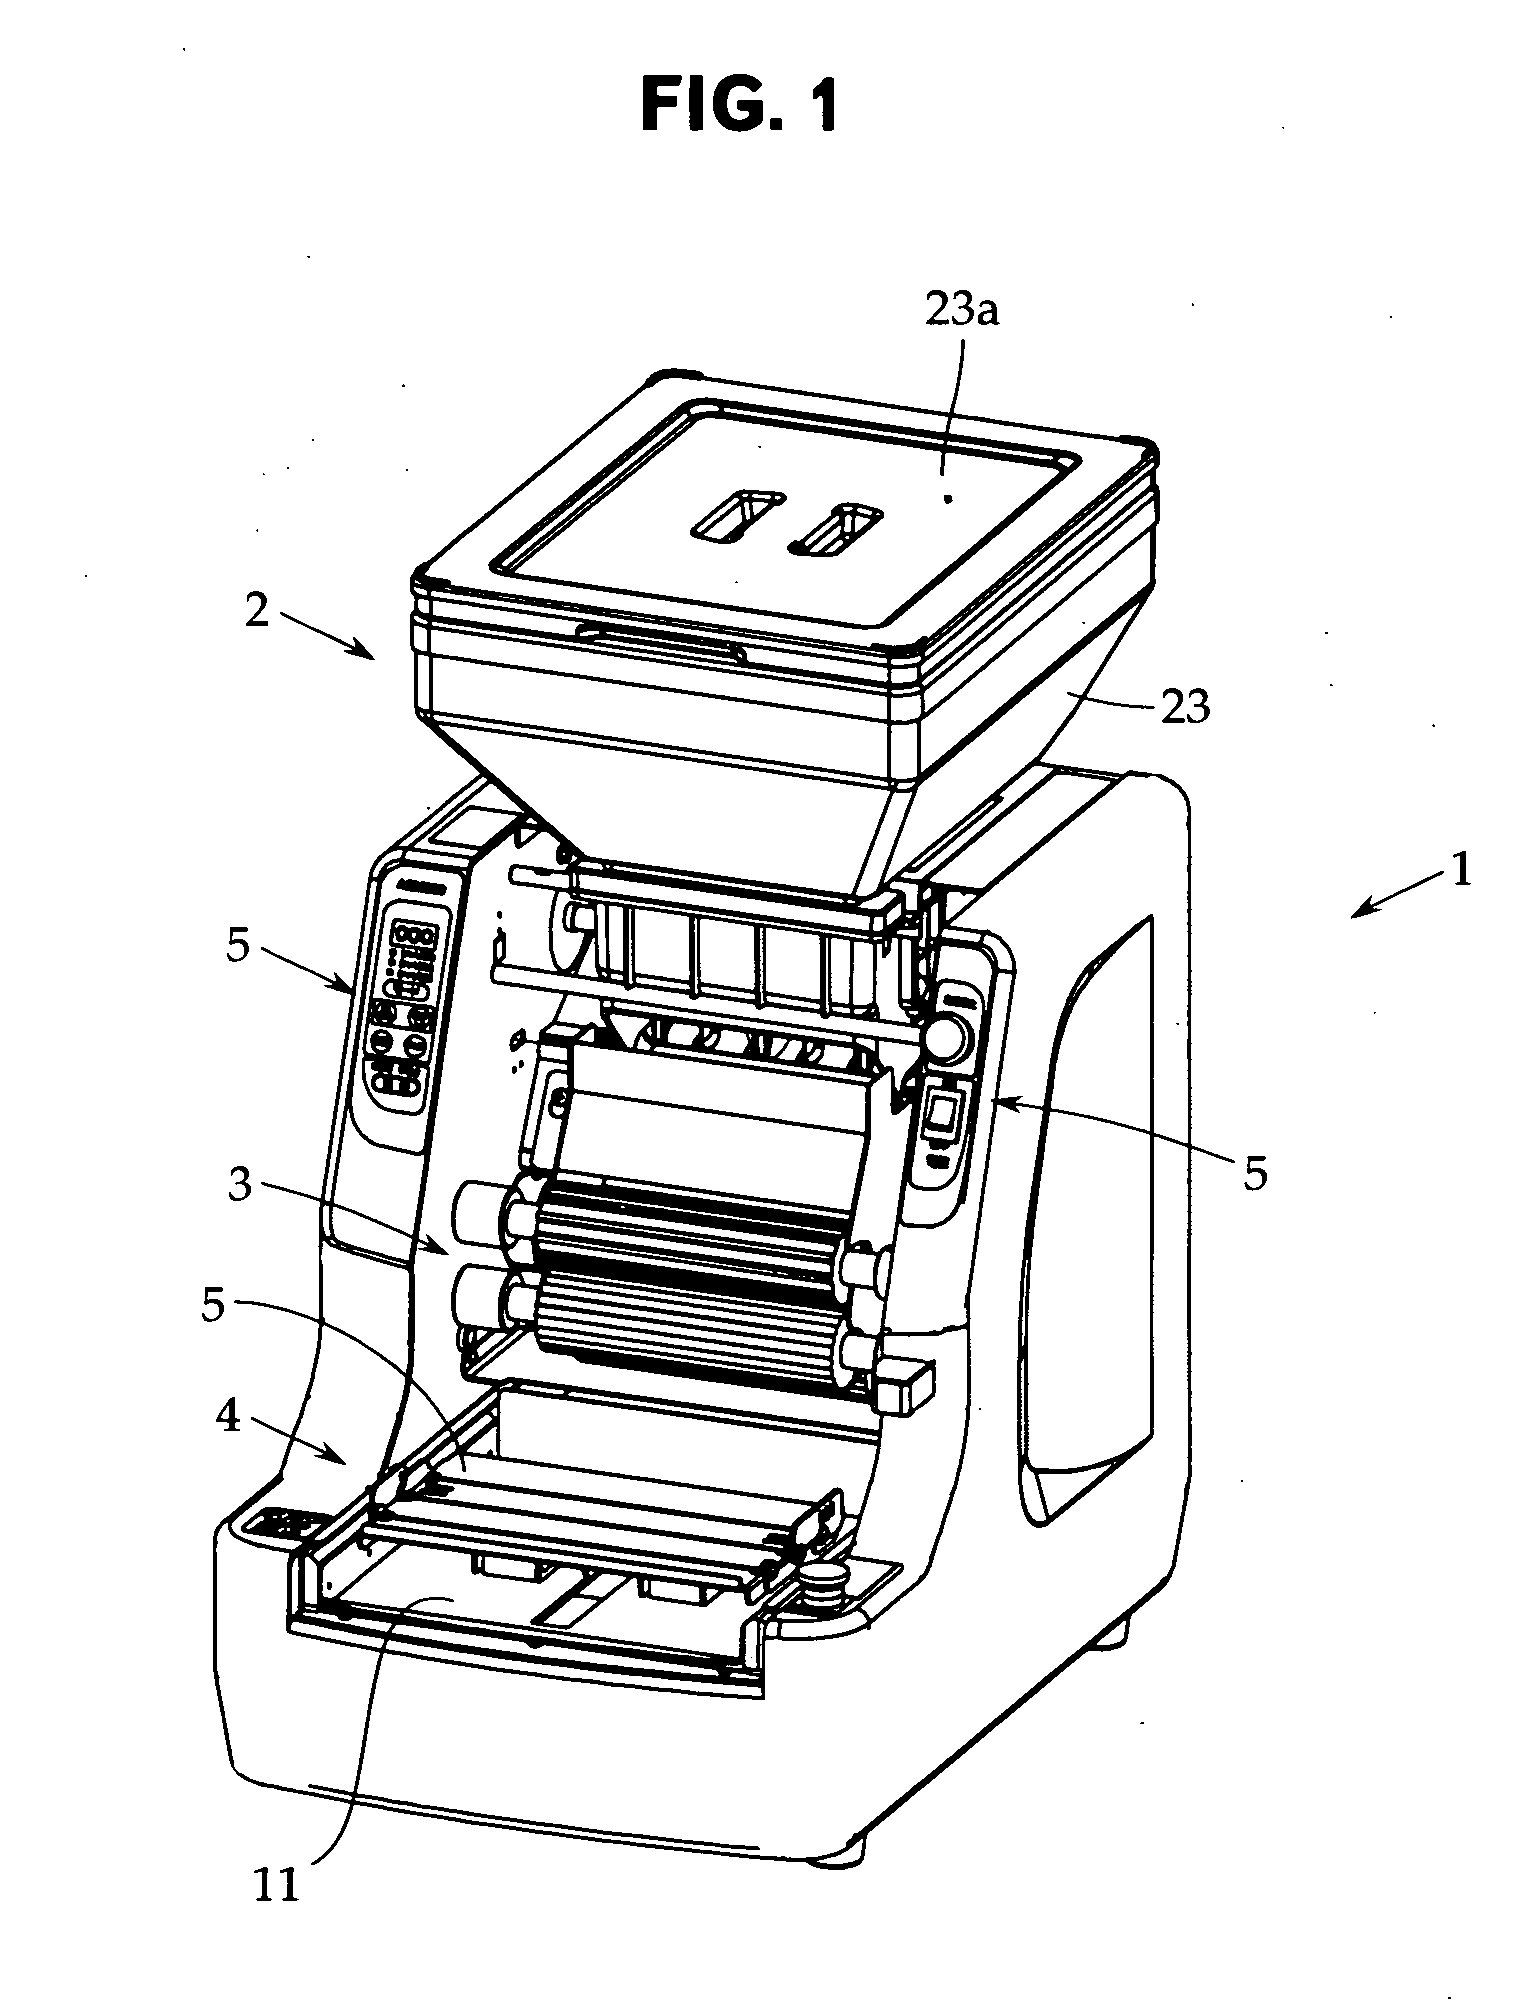 Cooked rice mold apparatus